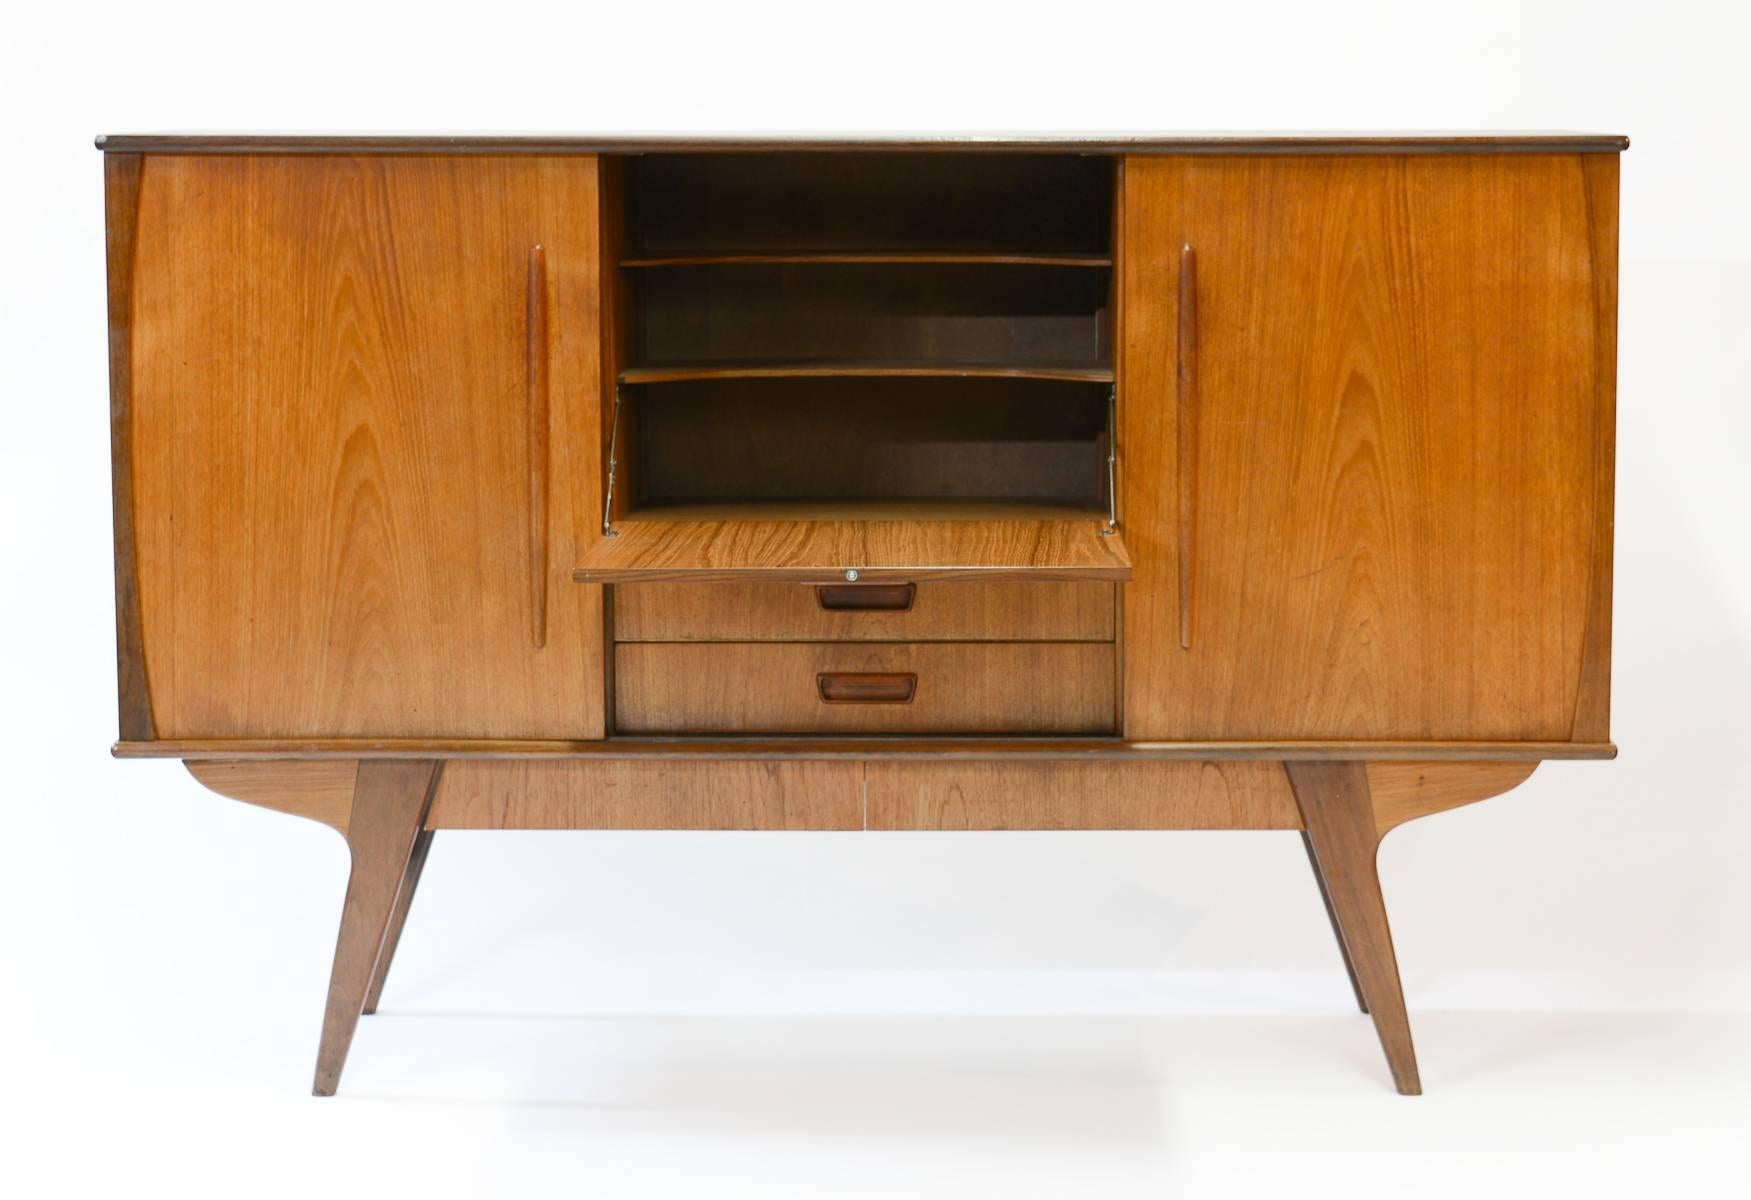 Elegant Monumental Danish Teak Sideboard with Angled Legs and Drop-Door Bar In Good Condition For Sale In Portland, OR